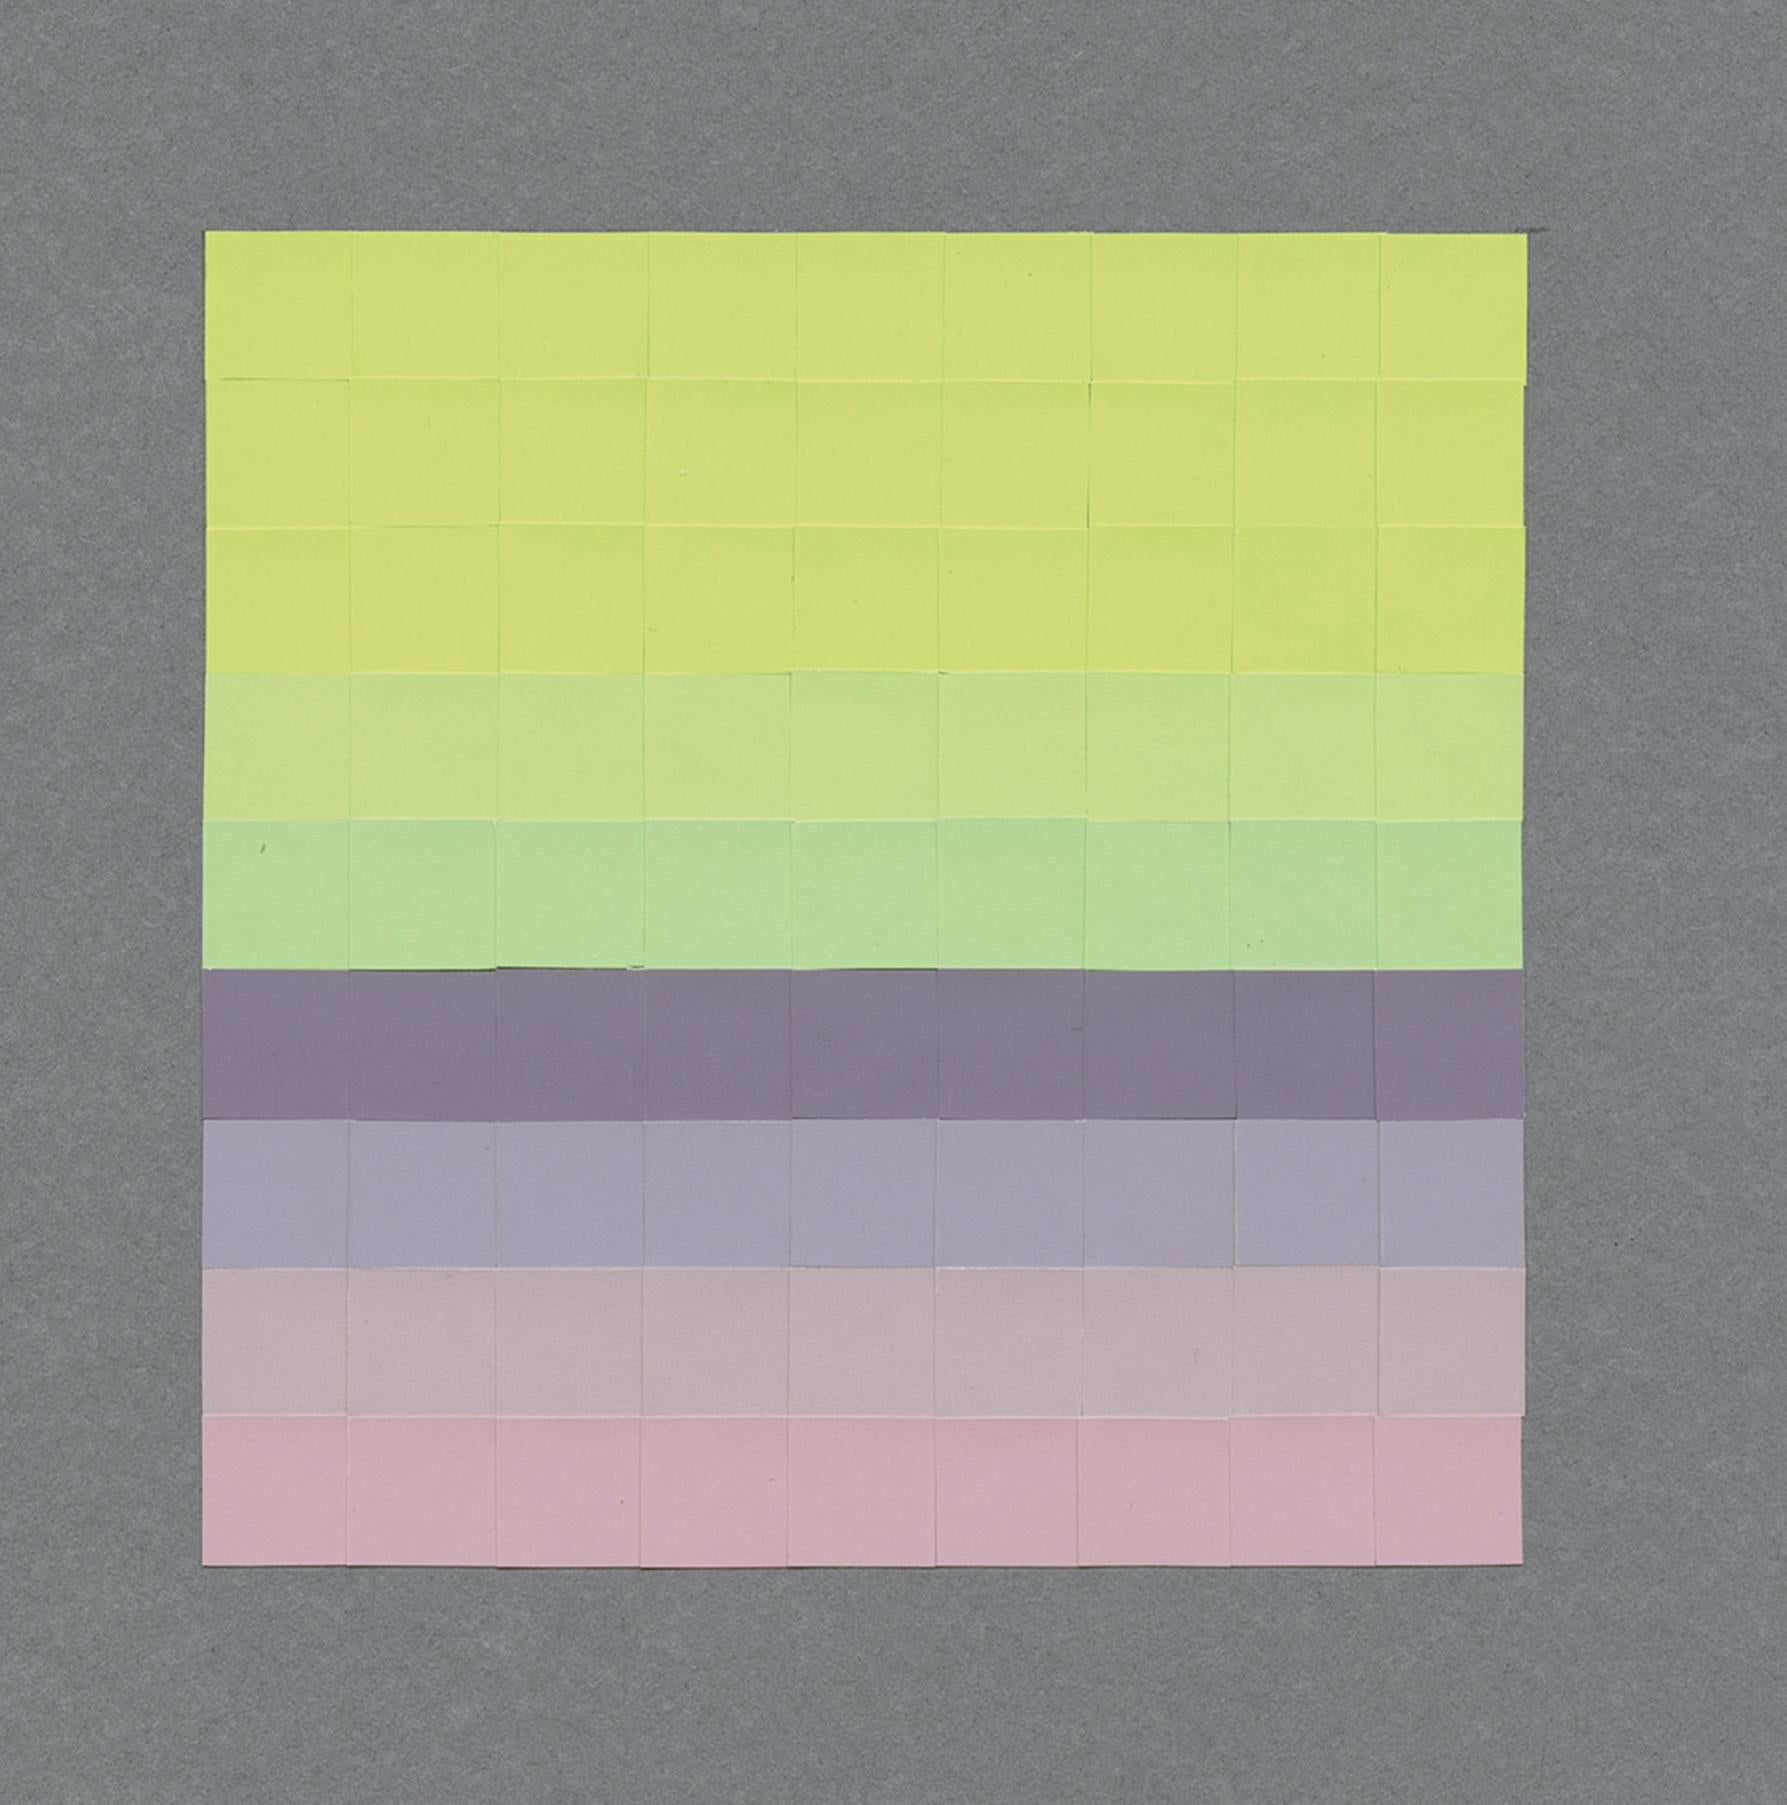 “Colors appear connected predominantly in space. Therefore, as constellations they can be seen in any direction and at any speed. And as they remain, we can return to them repeatedly and in many ways.”

― Josef Albers, Interaction of Color